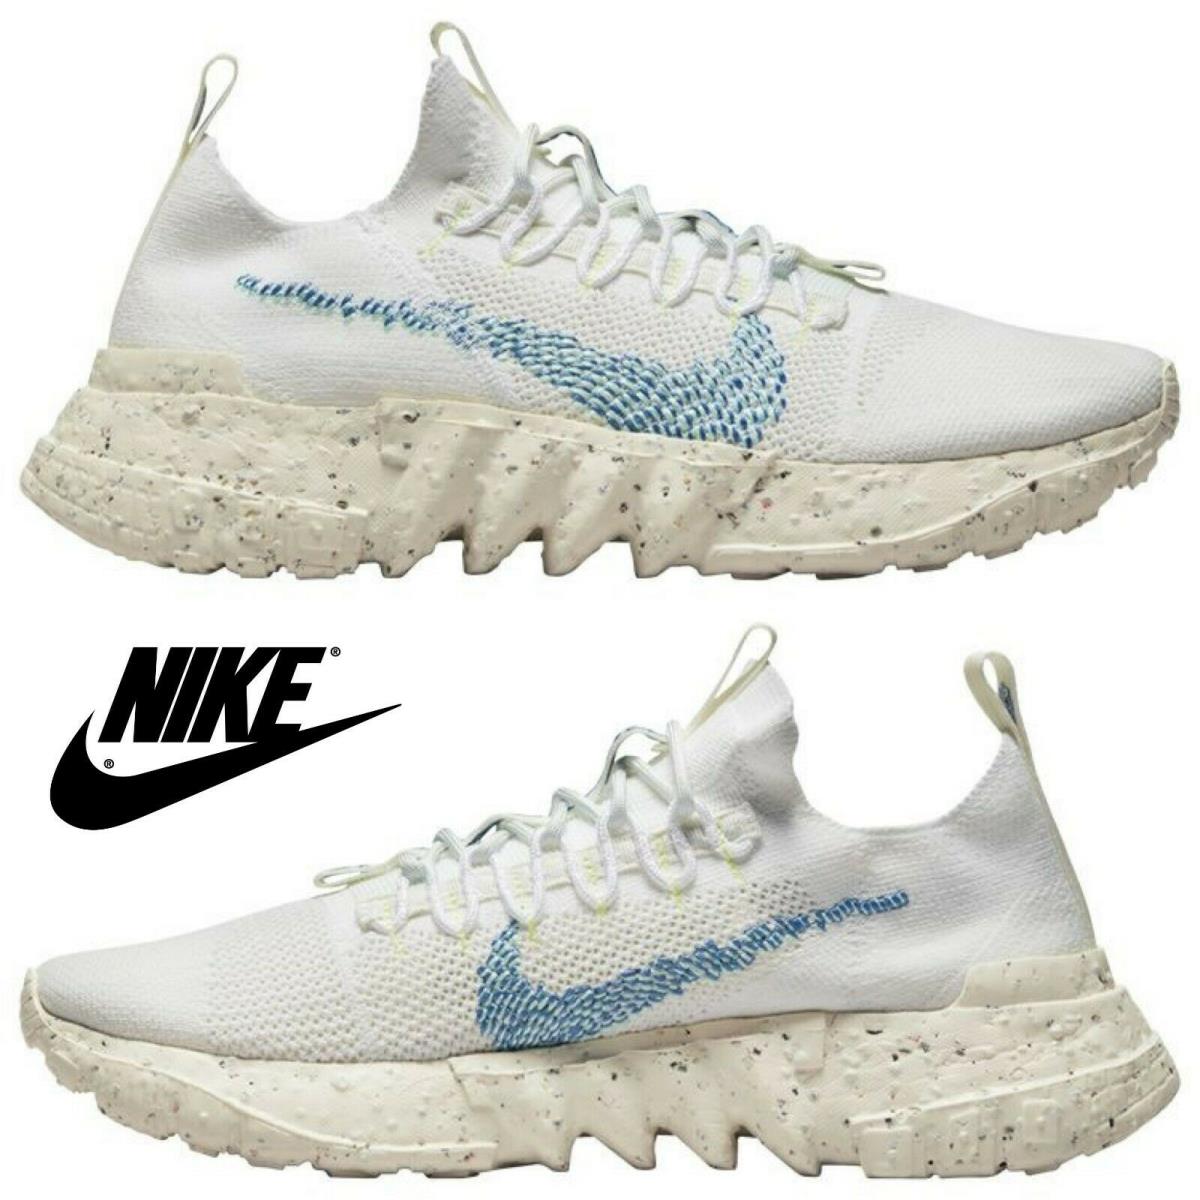 Nike Space Hippie 1 Men`s Casual Shoes Running Athletic Comfort Sport White Blue